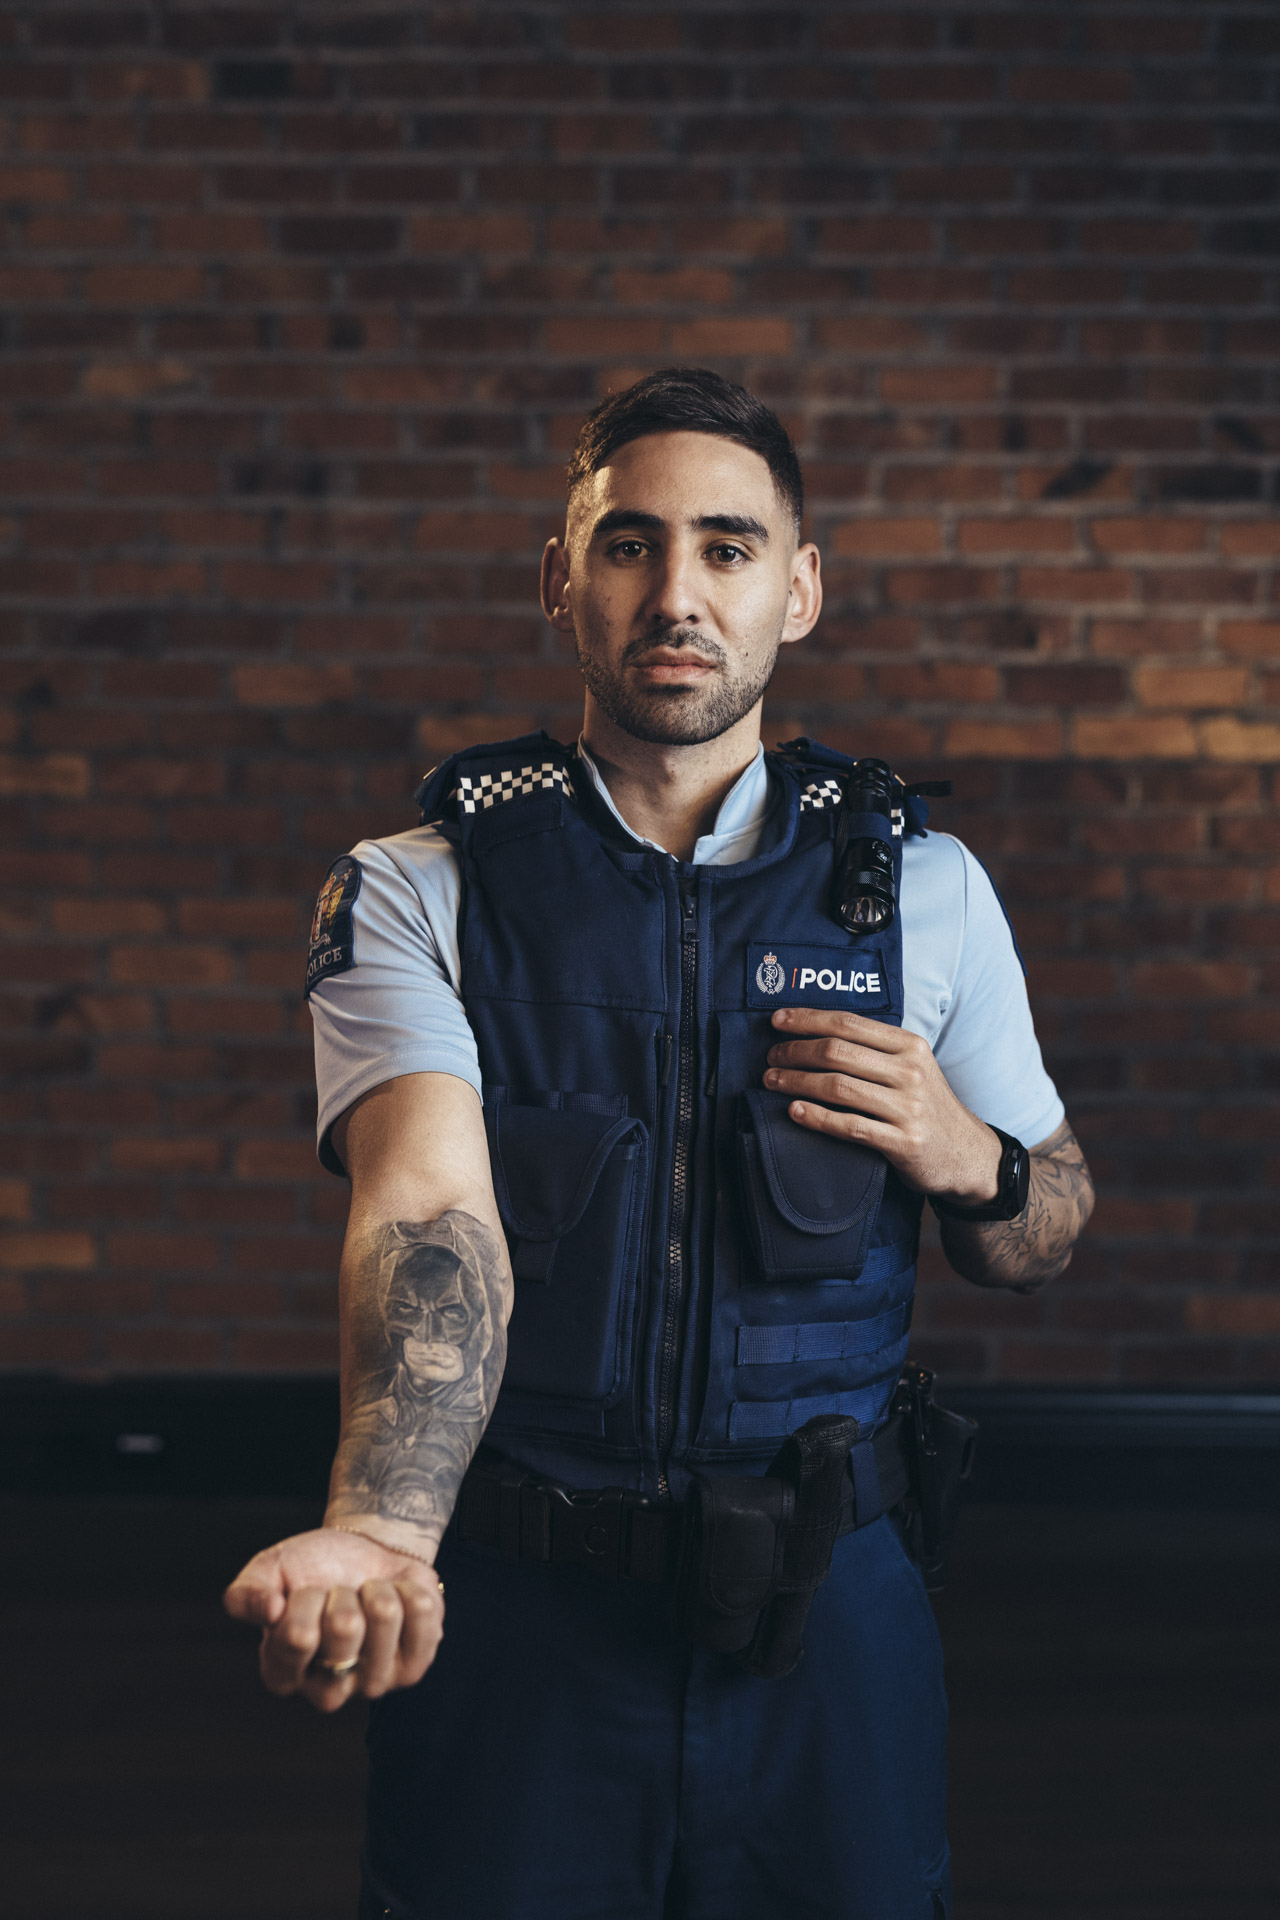 Police can now have visible tattoos on arms and legs  TVMnewsmt